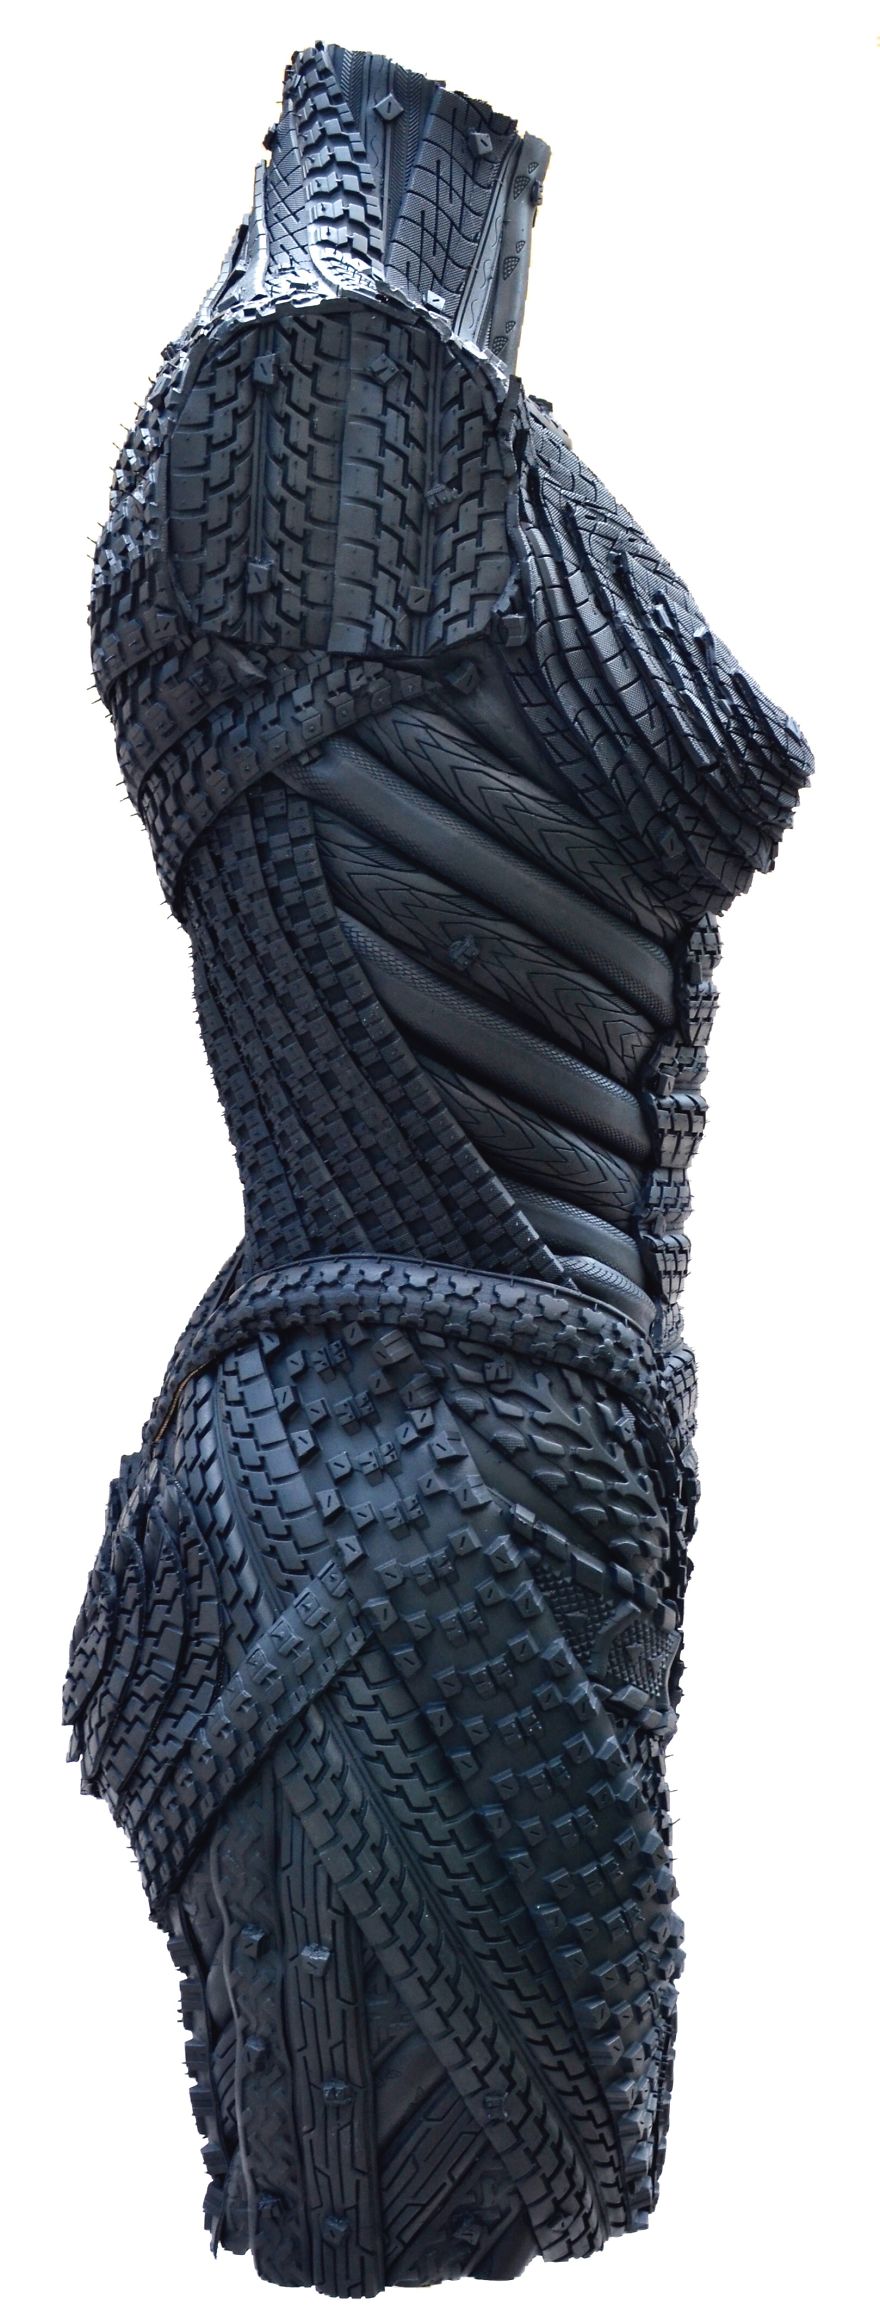 Recycled Tire Sculpture Of Female Torso